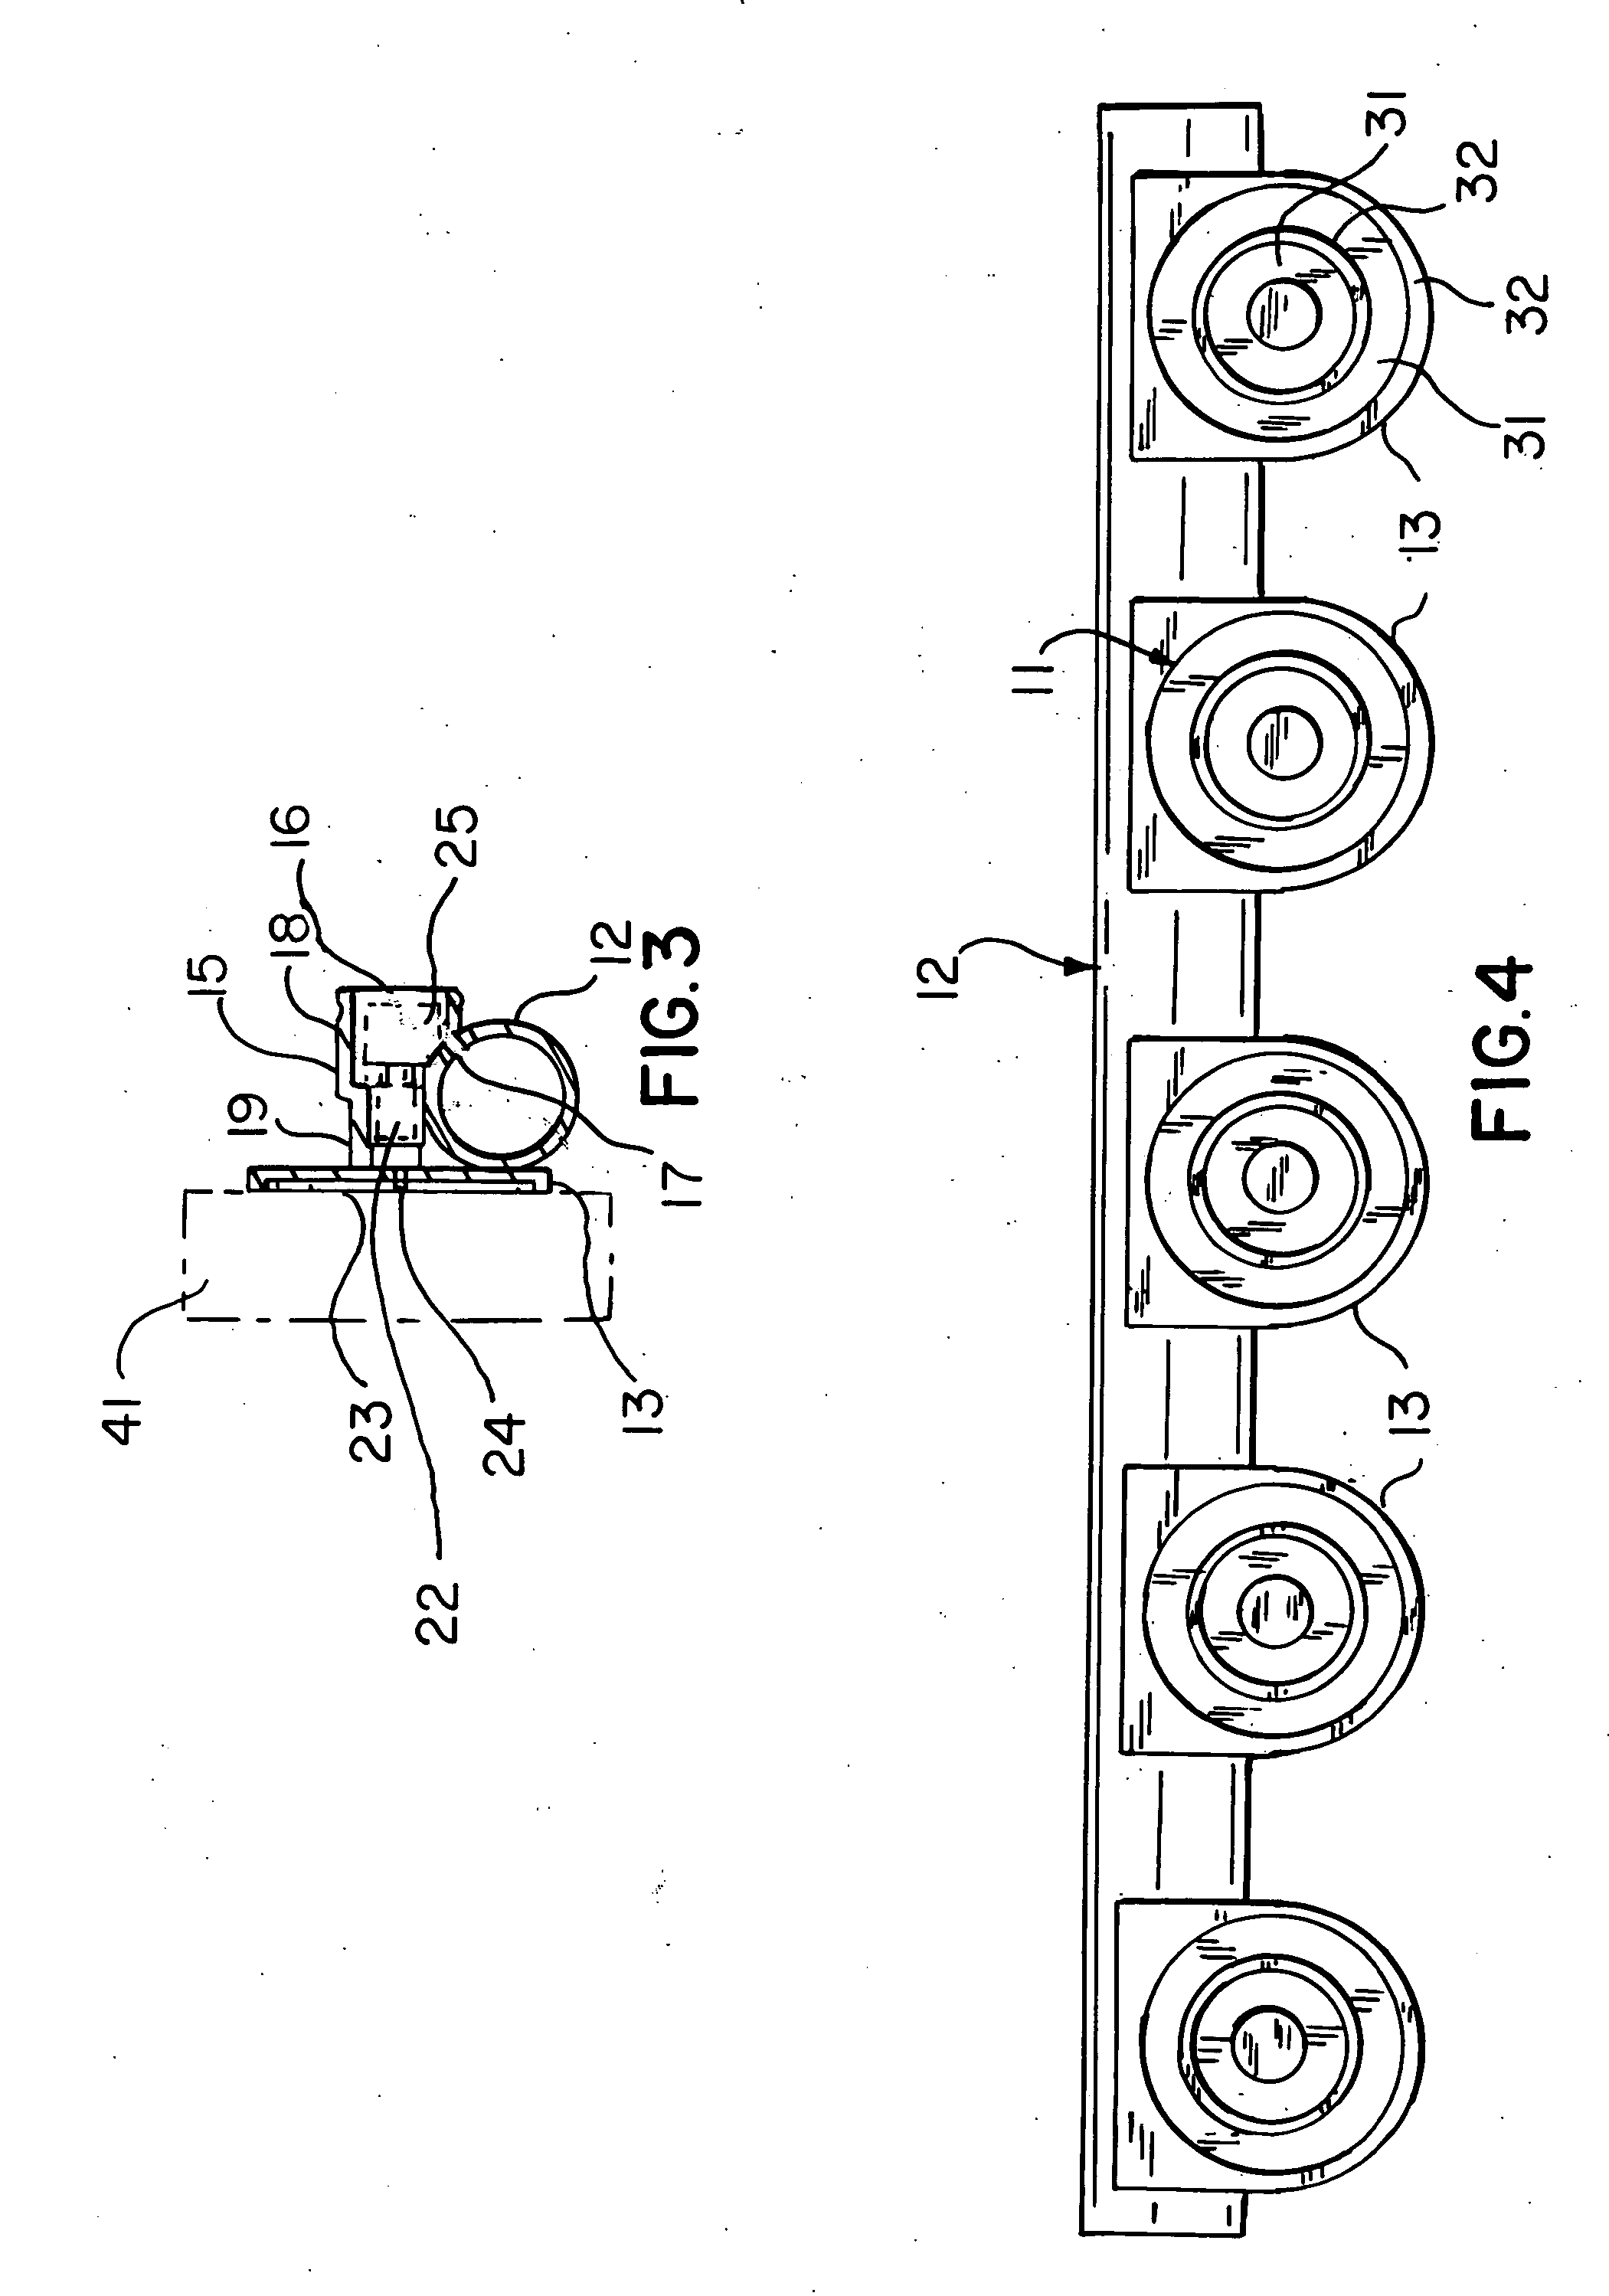 Air injector system apparatus and methods for a tub or spa